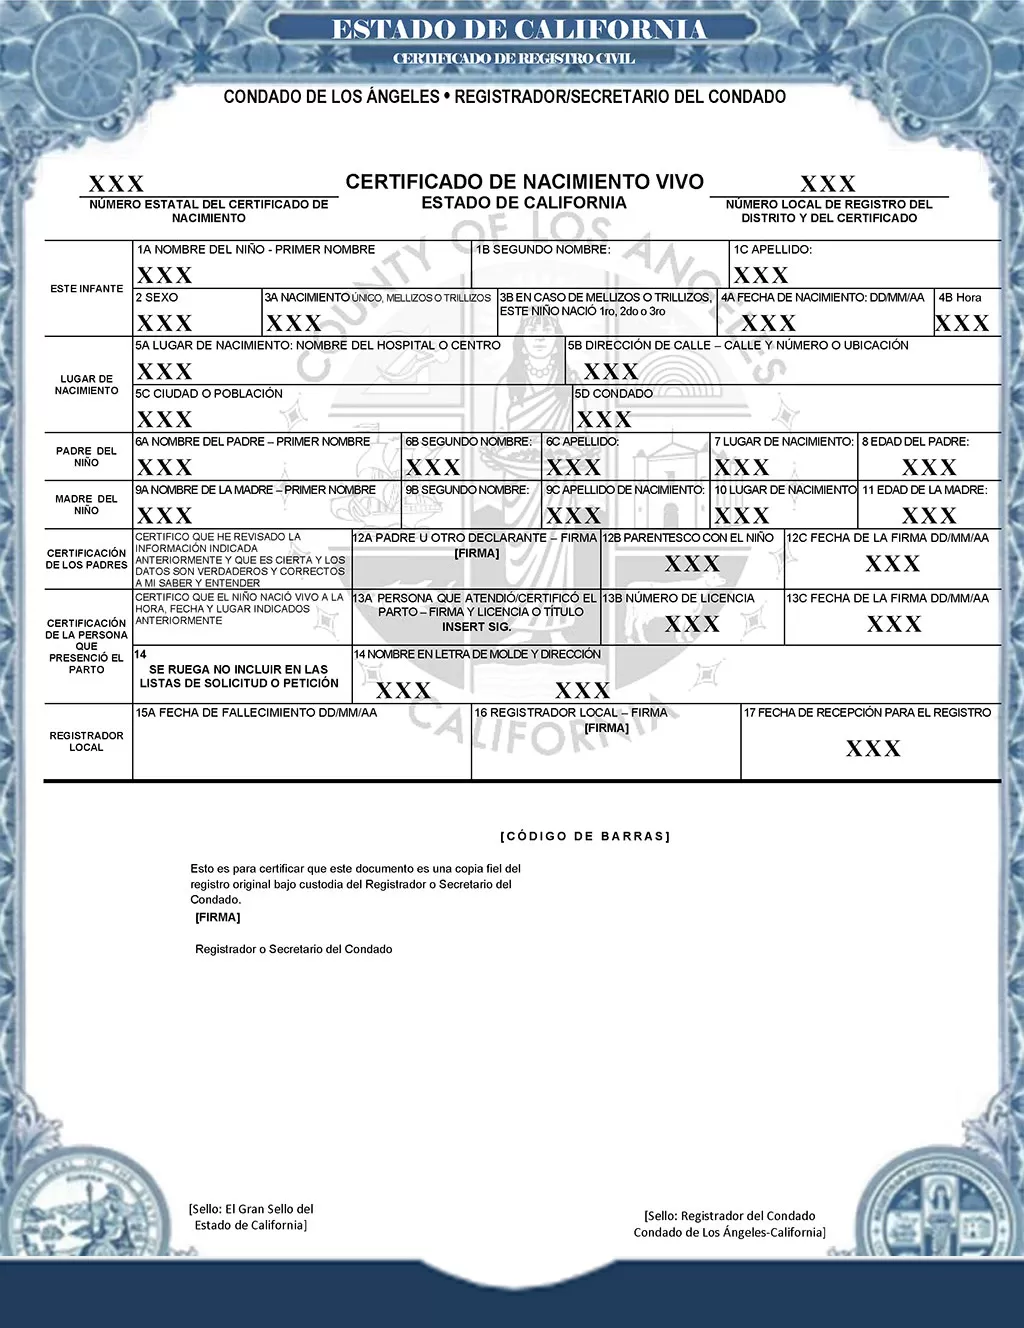 Fast, Easy, and Accurate Birth Certificate Translations In Birth Certificate Translation Template English To Spanish